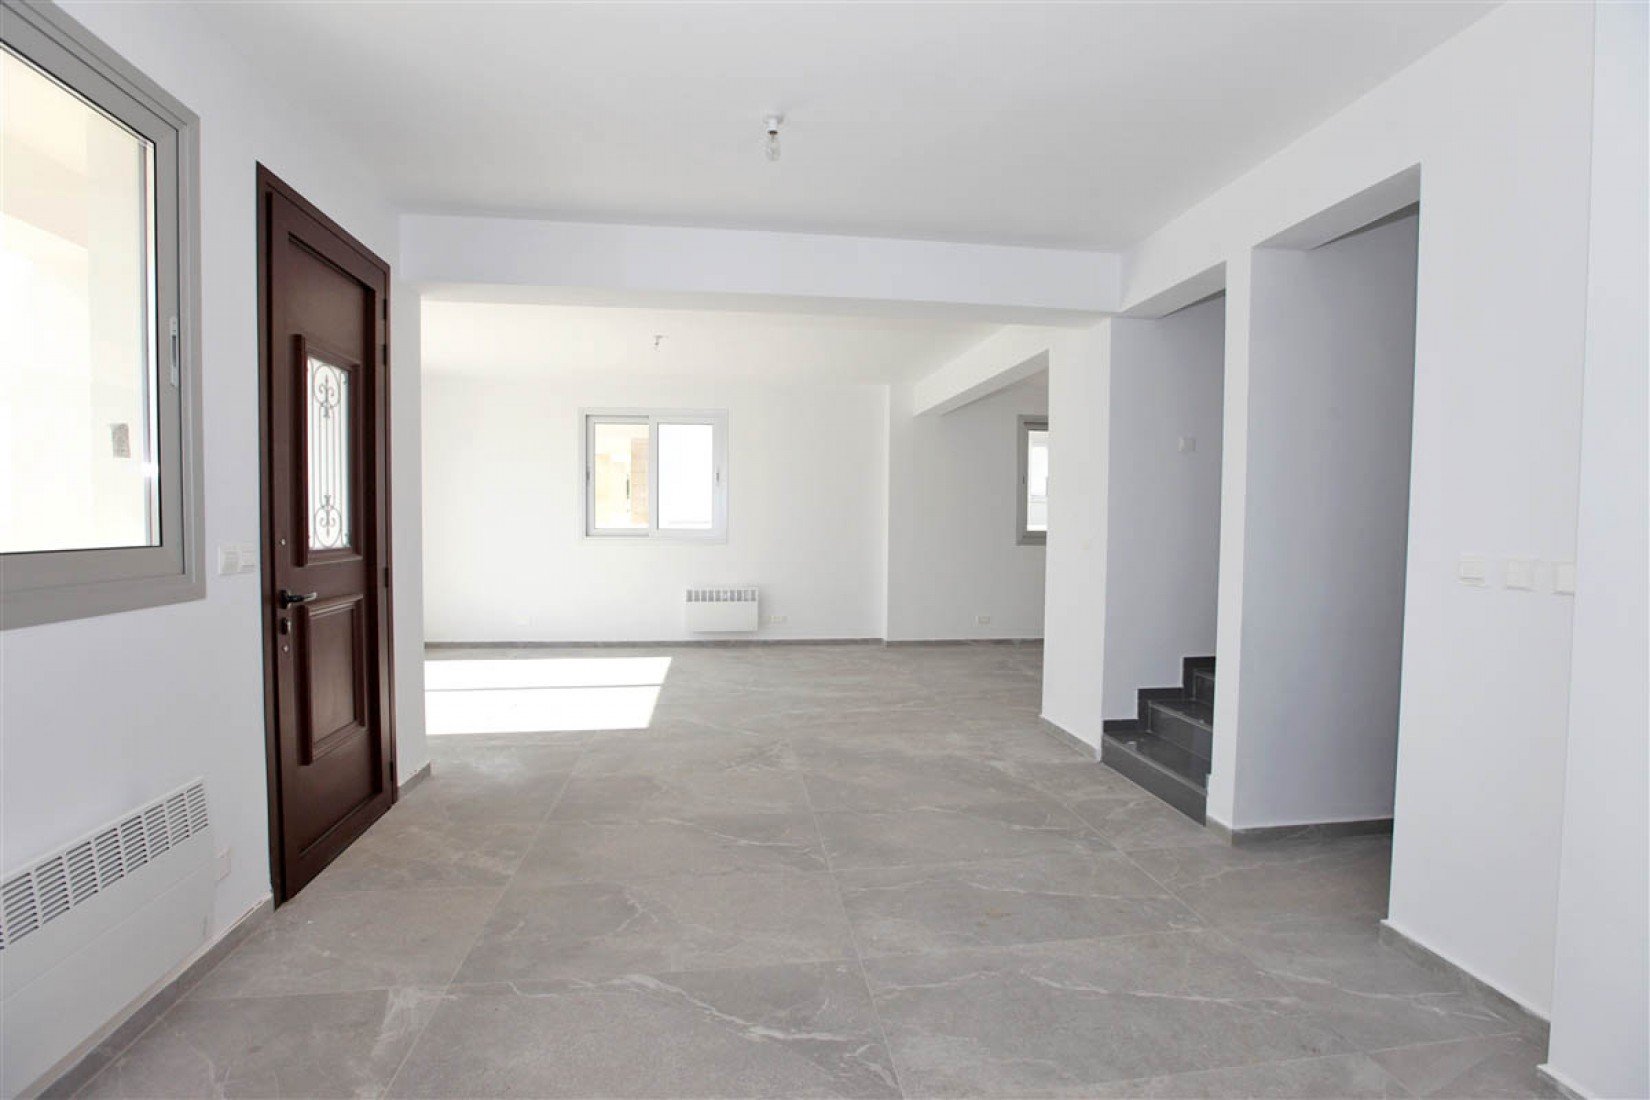 House for sale in Nicosia, Cyprus 1559785841